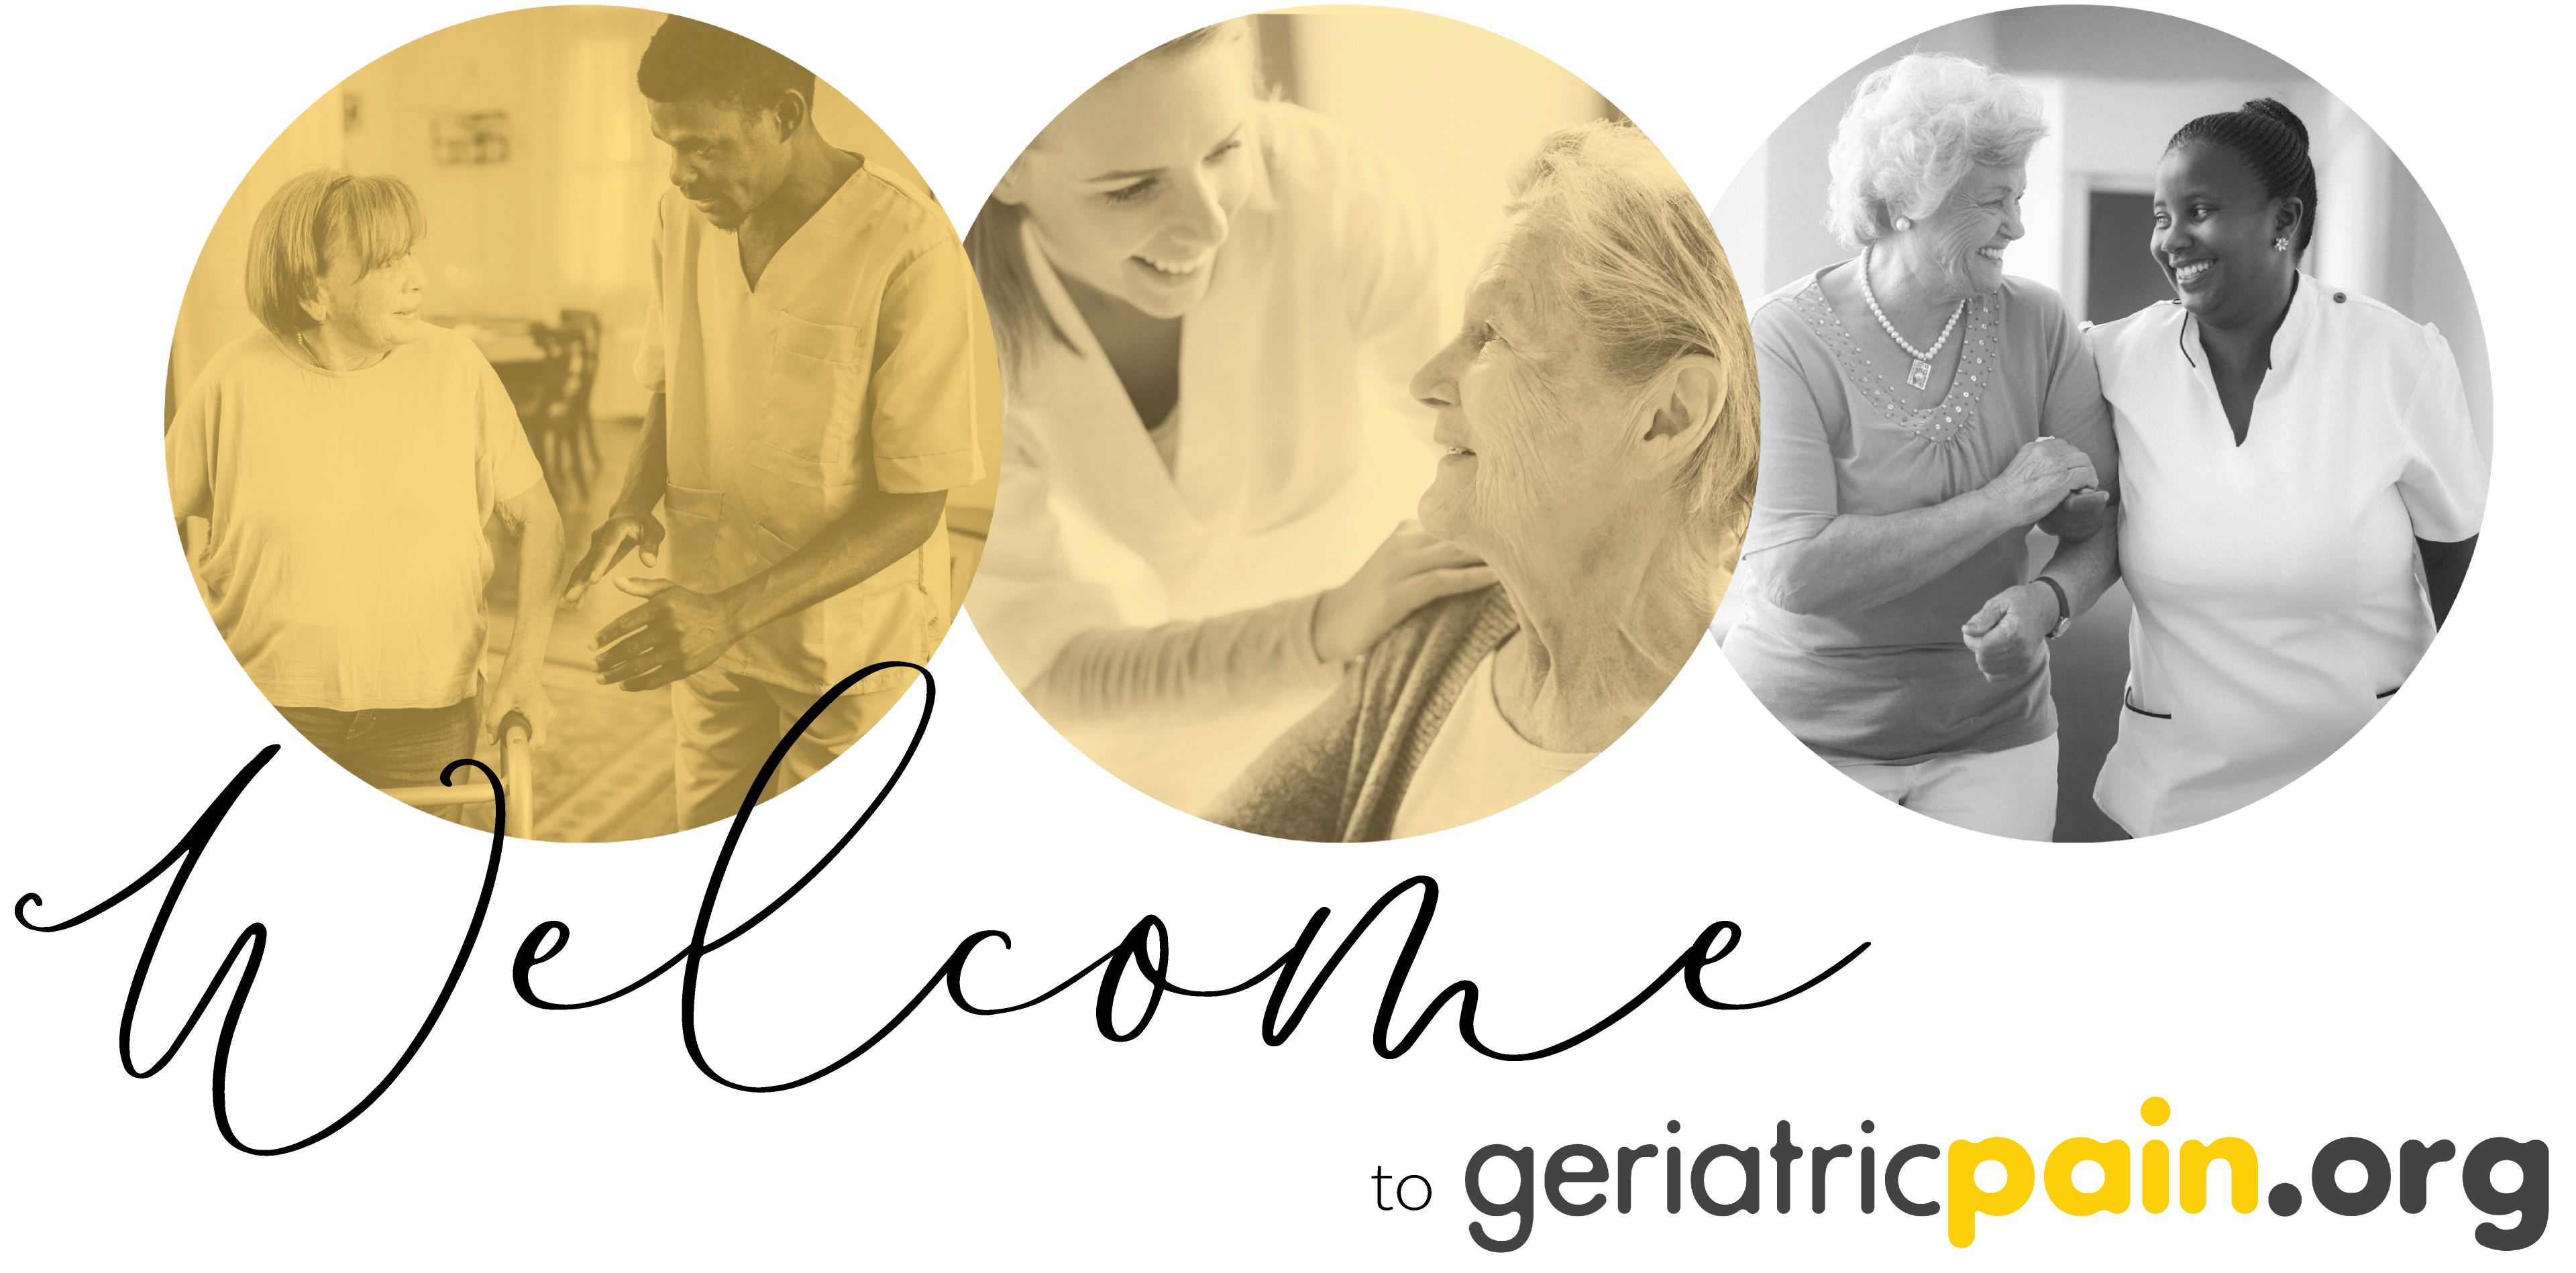 Geriatric Pain Resources and tools for quality pain care